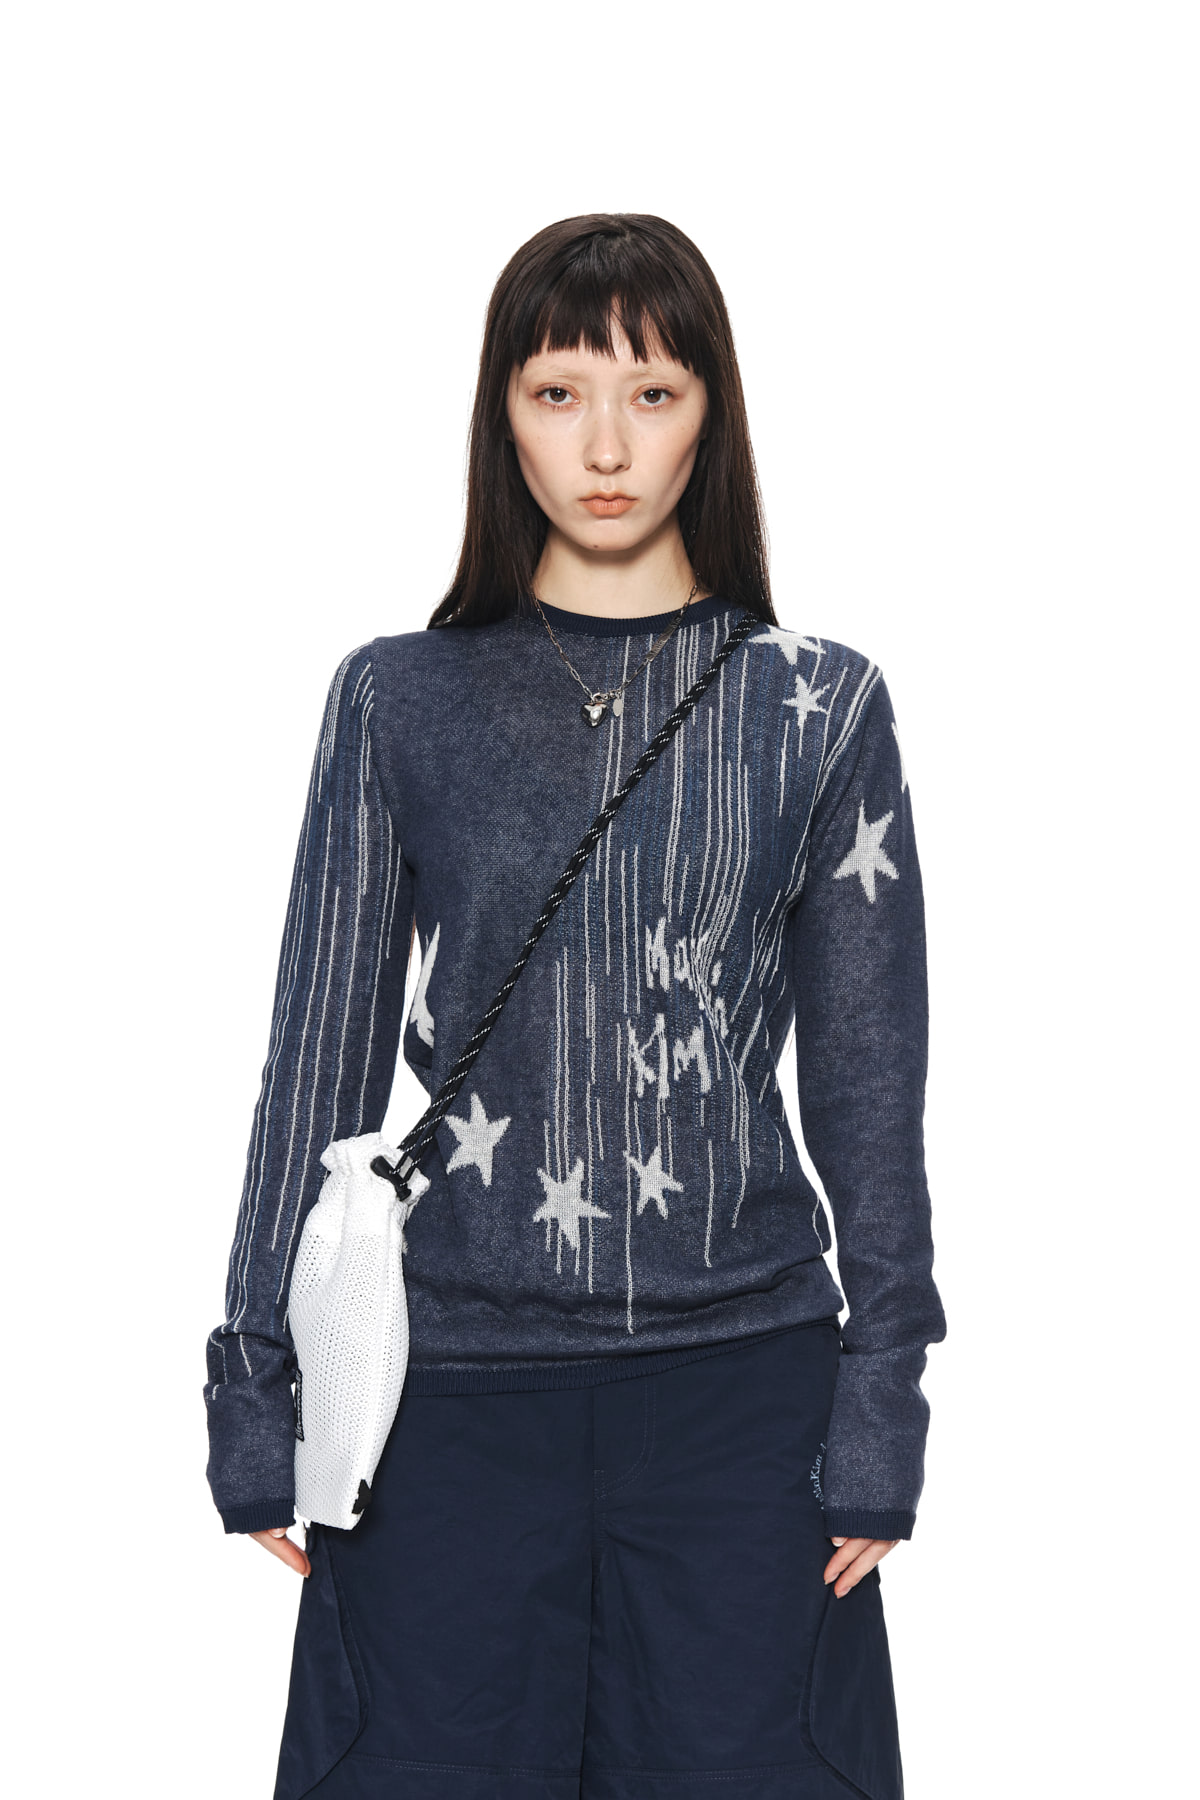 MILKY WAY JACQUARD KNIT TOP IN NAVY